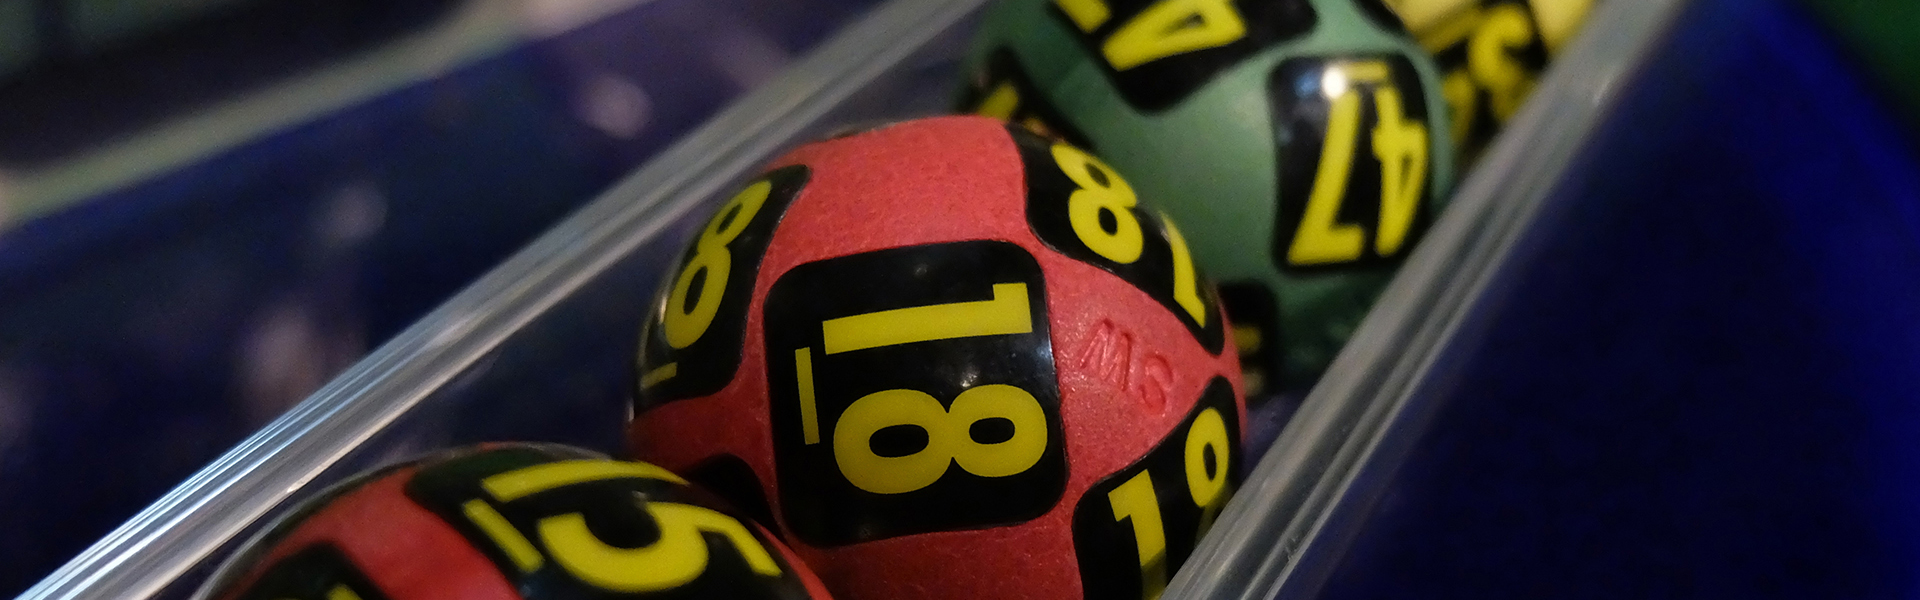 A stock photo showing a series of lottery balls